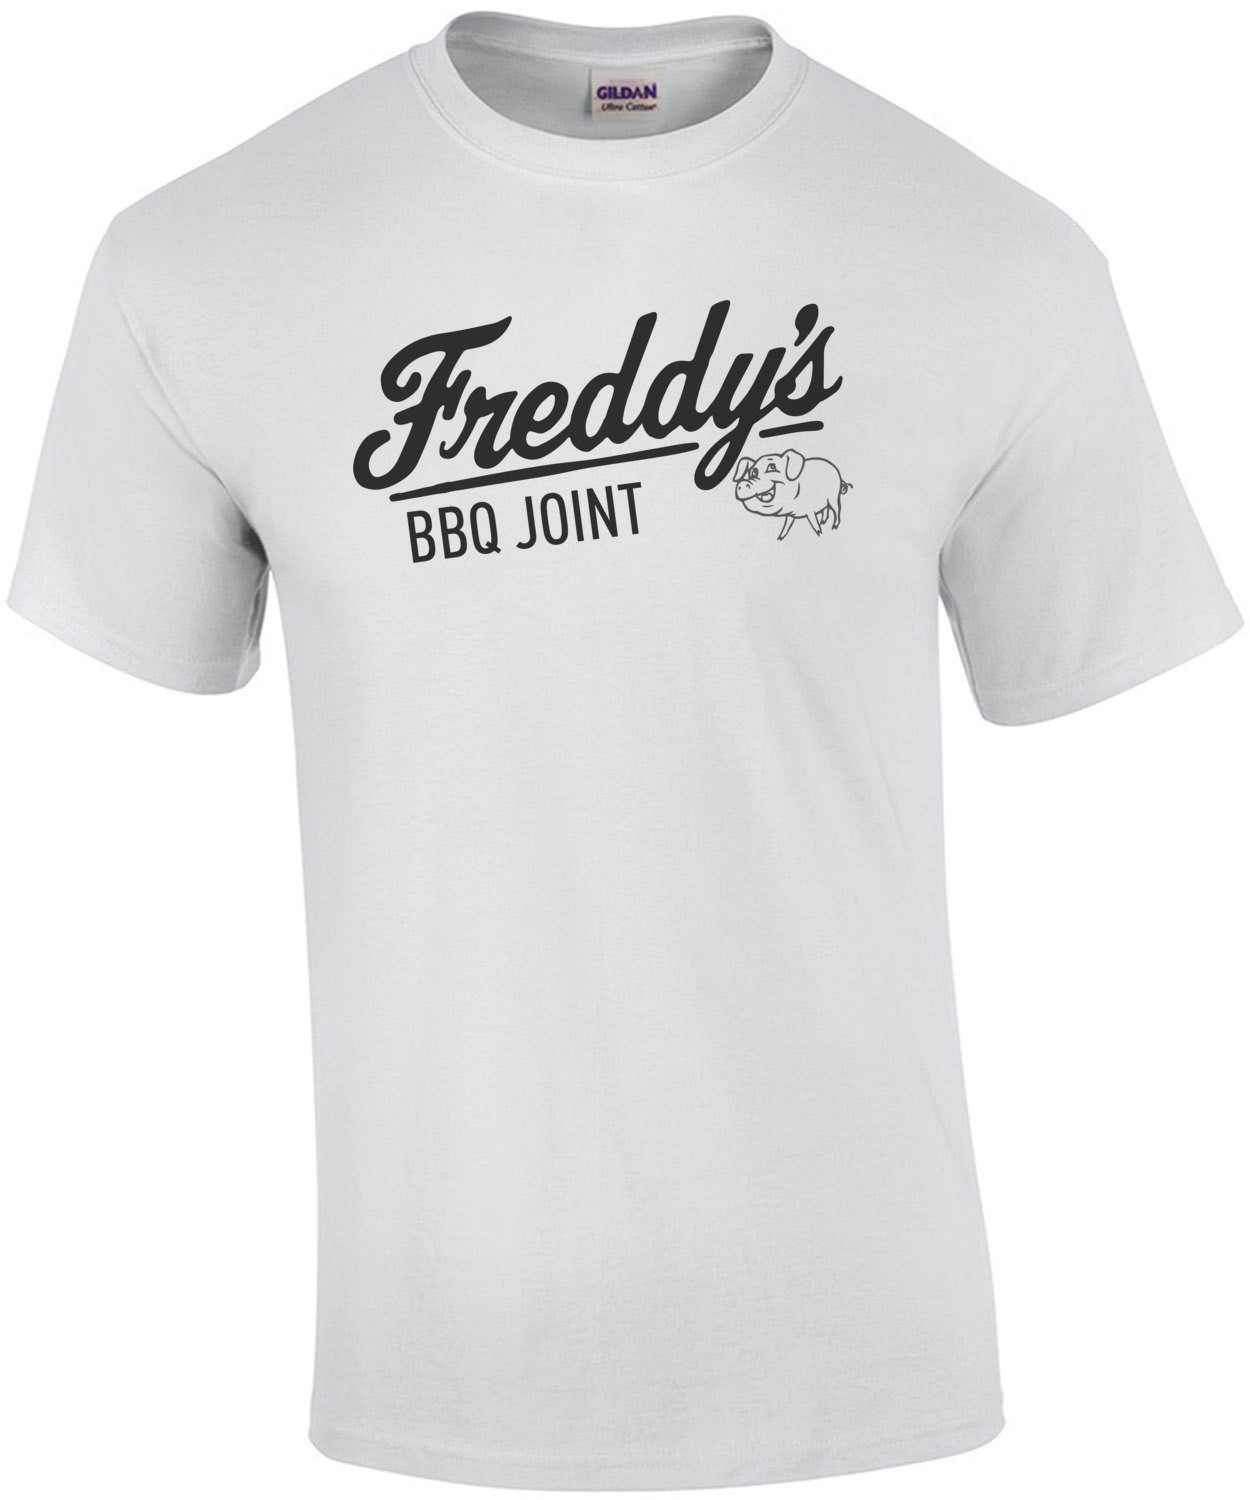 freddy's bbq joint - house of cards